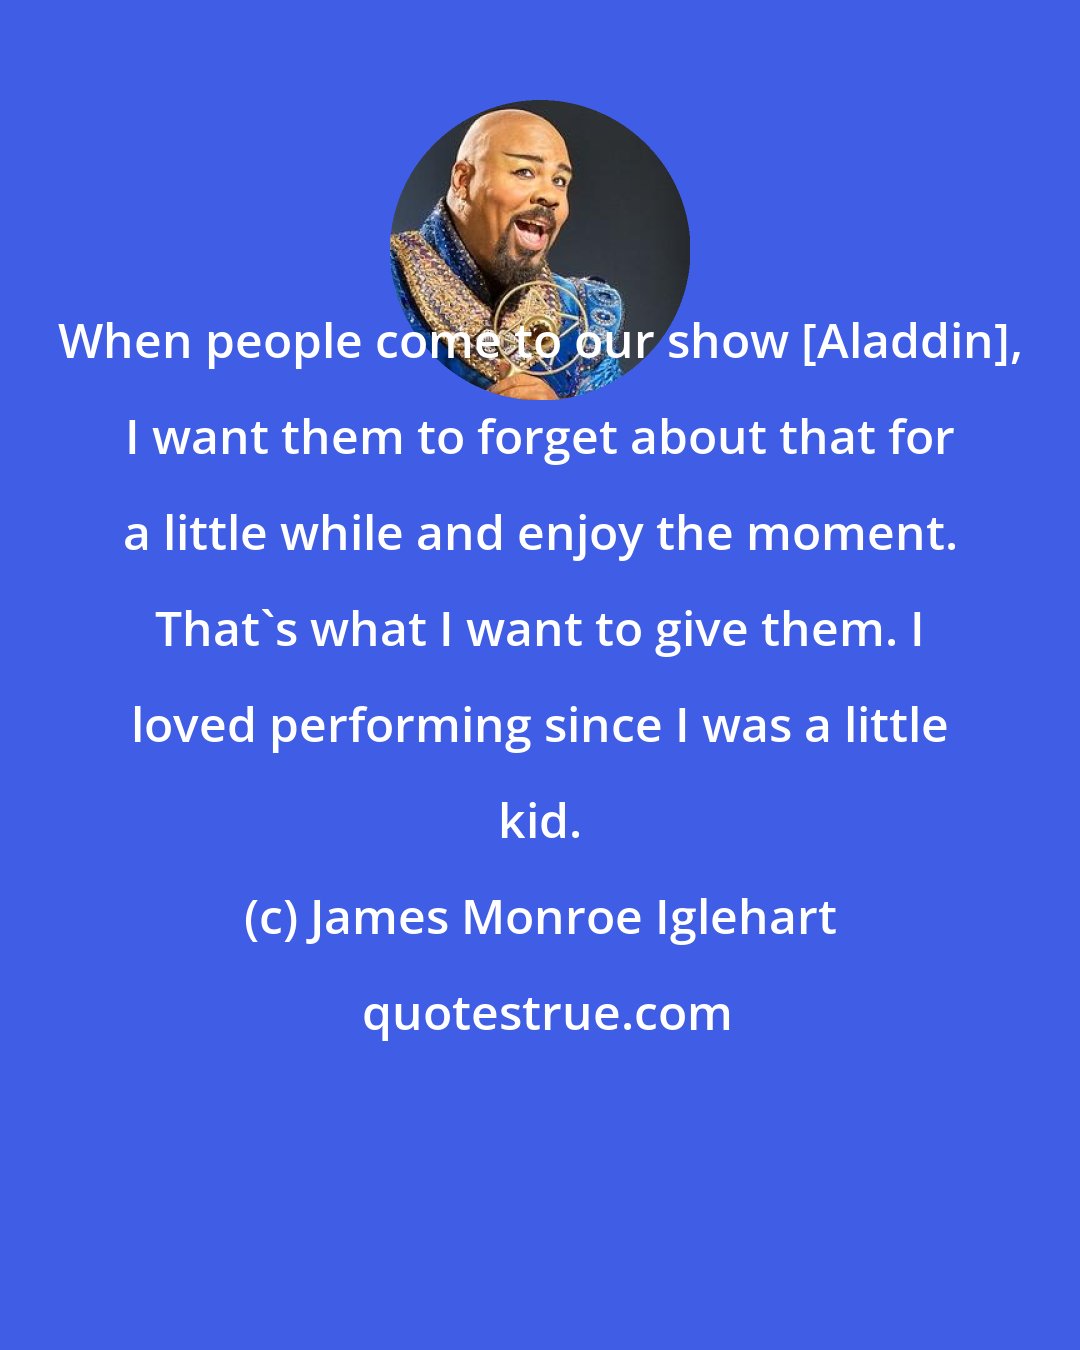 James Monroe Iglehart: When people come to our show [Aladdin], I want them to forget about that for a little while and enjoy the moment. That's what I want to give them. I loved performing since I was a little kid.